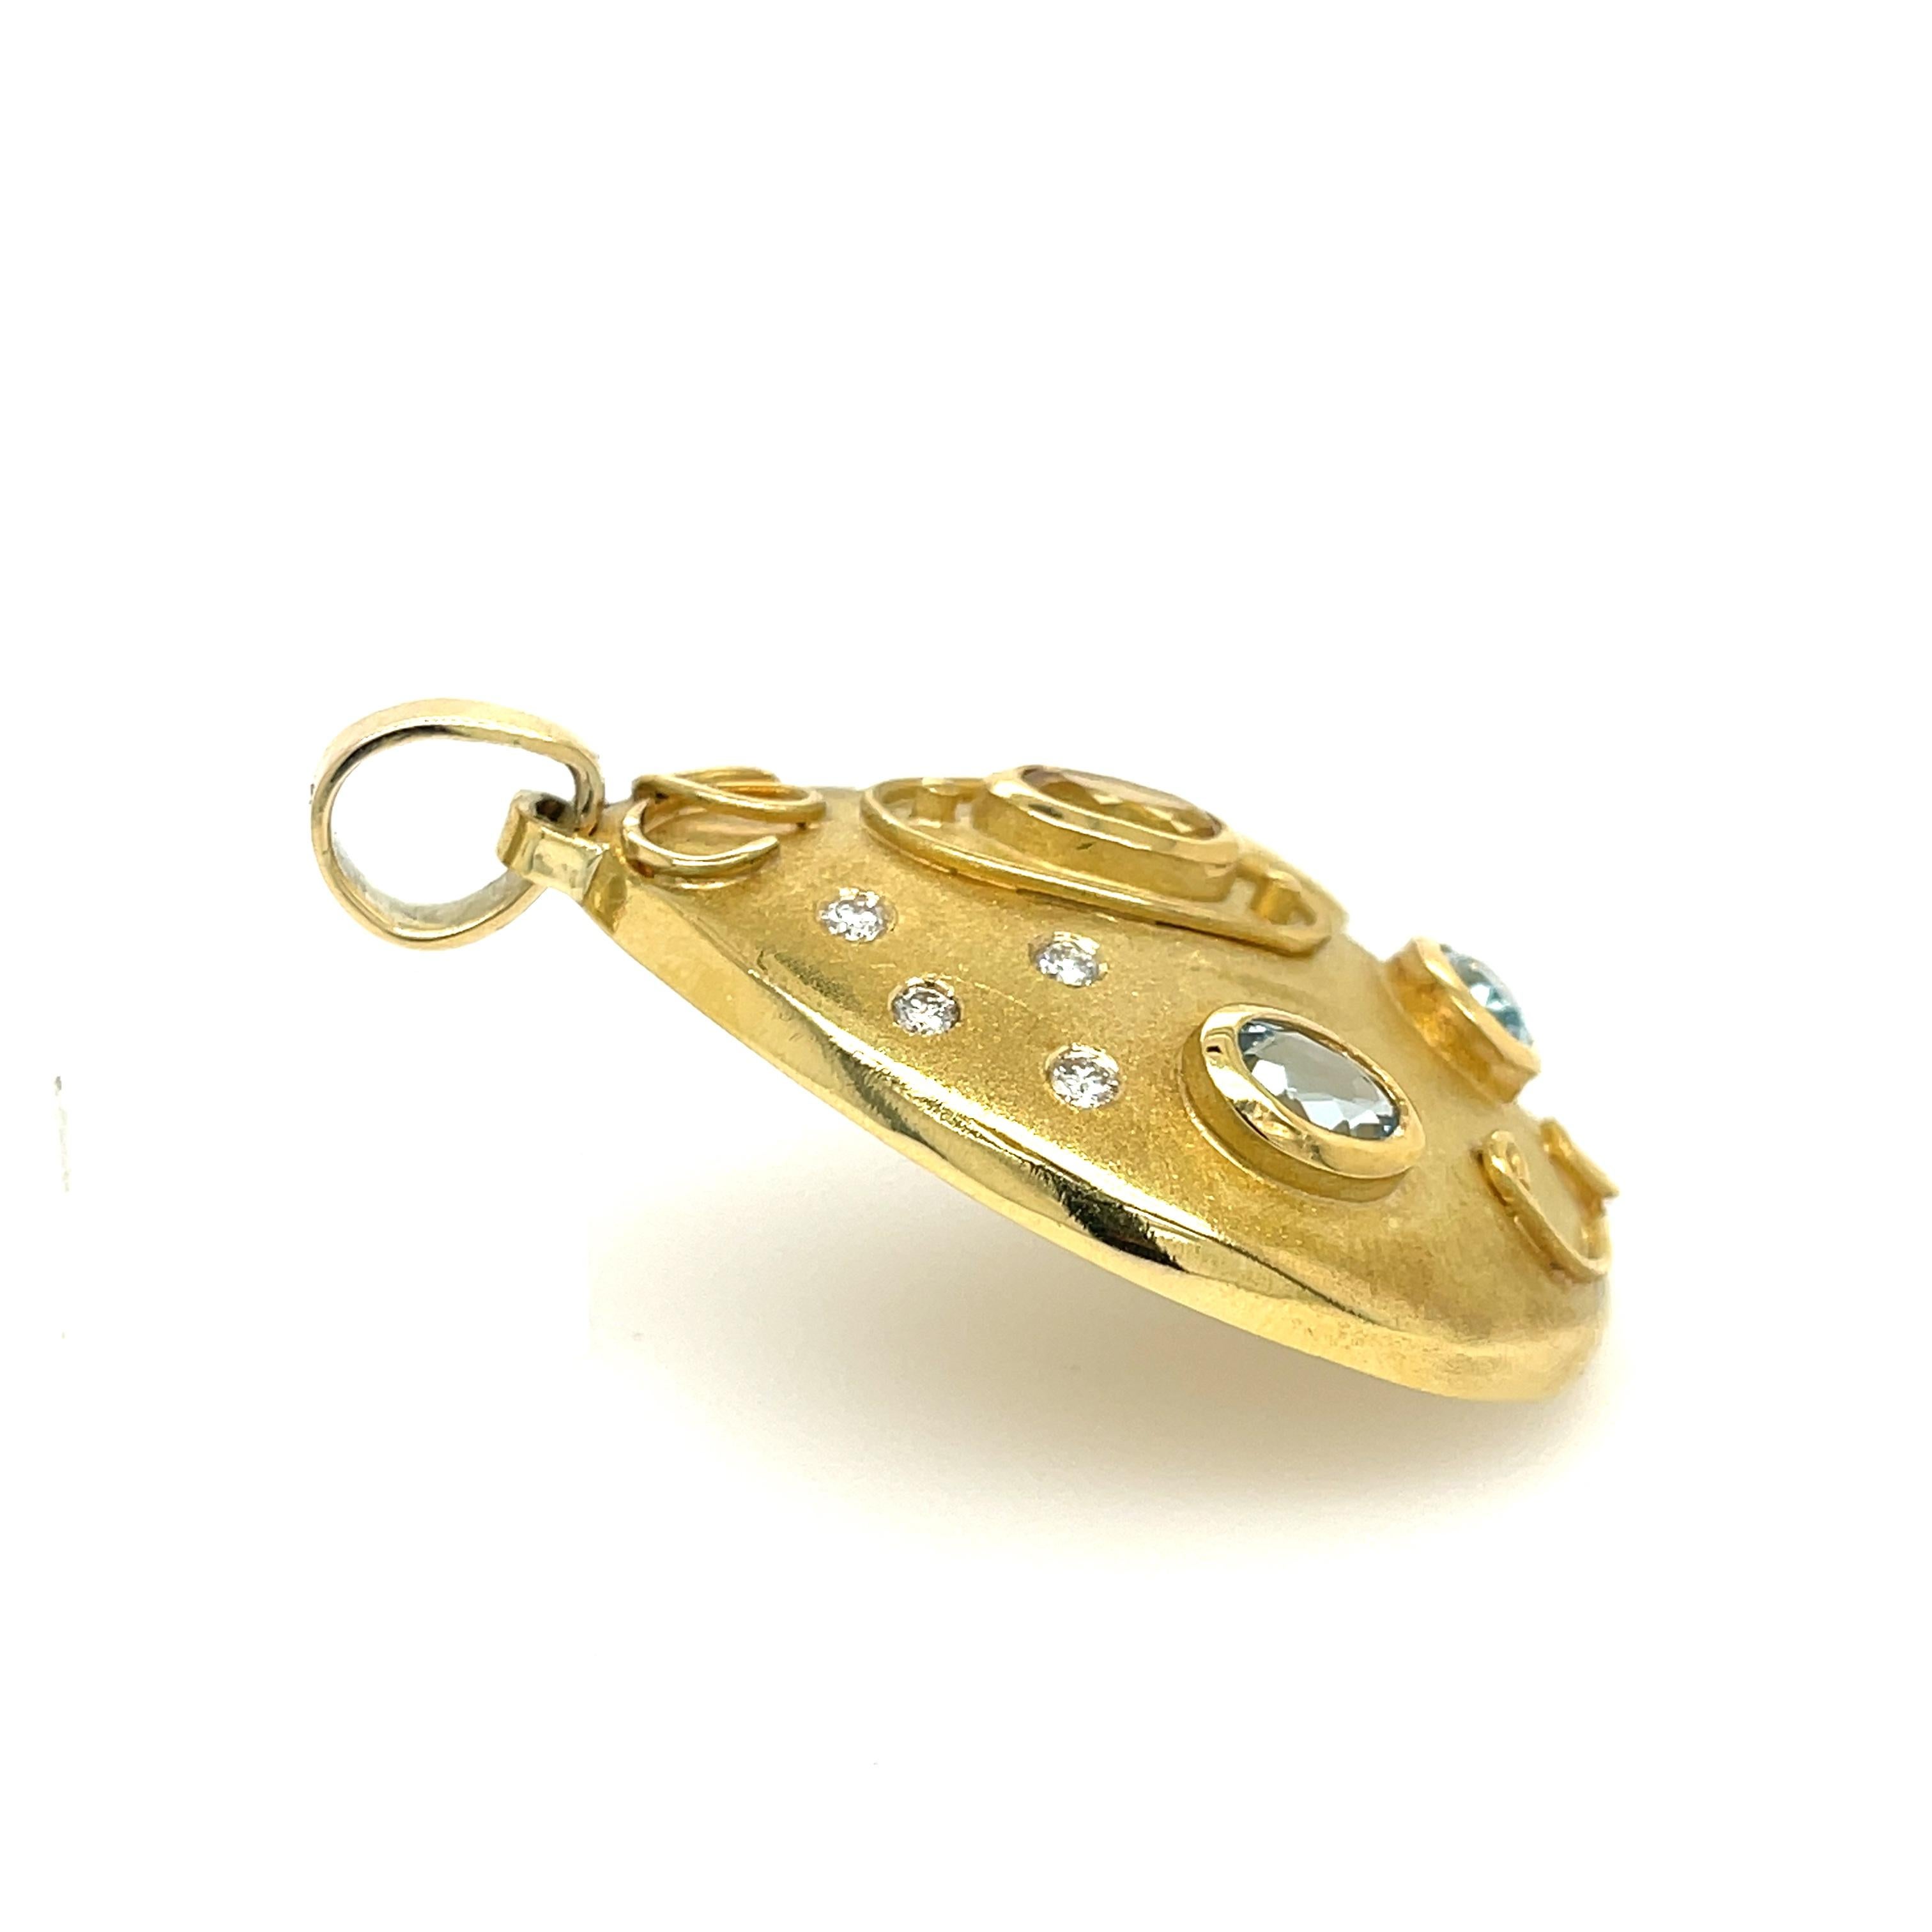 Topaz, Citrine, and Diamond Pendant 14K Yellow Gold. Pendant only, does not include chain.

14 Grams
1.75